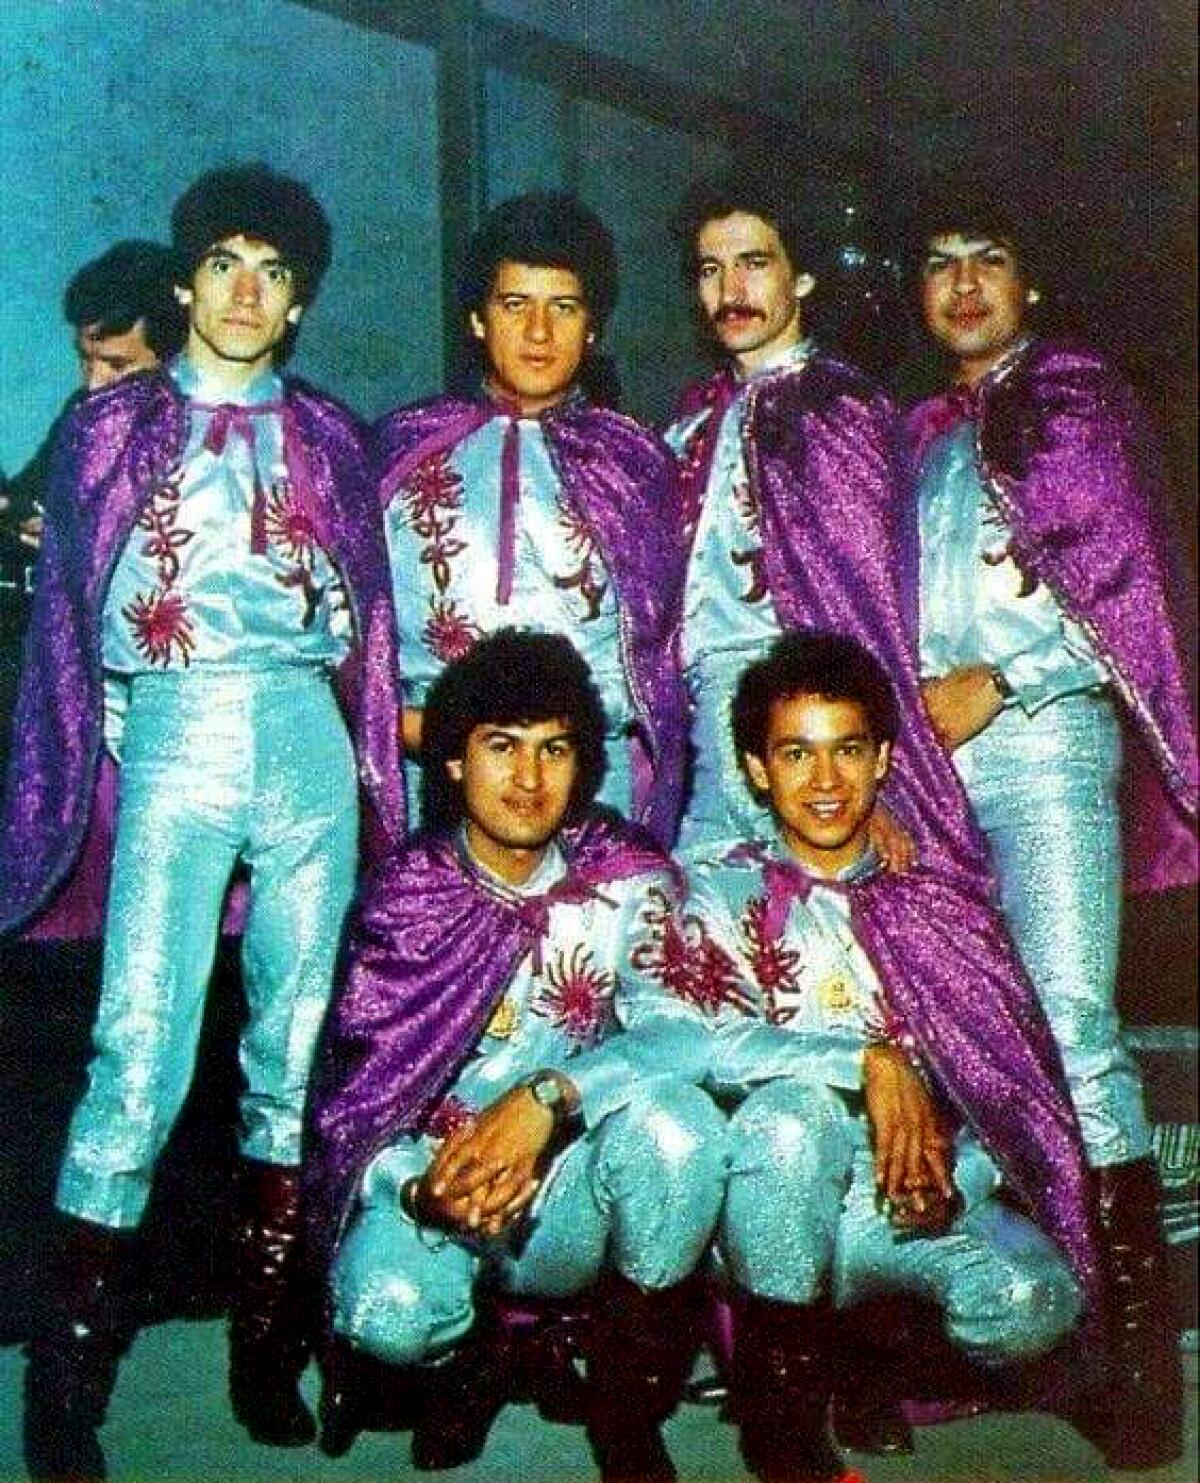 Los Bukis in their stage costumes in 1982.